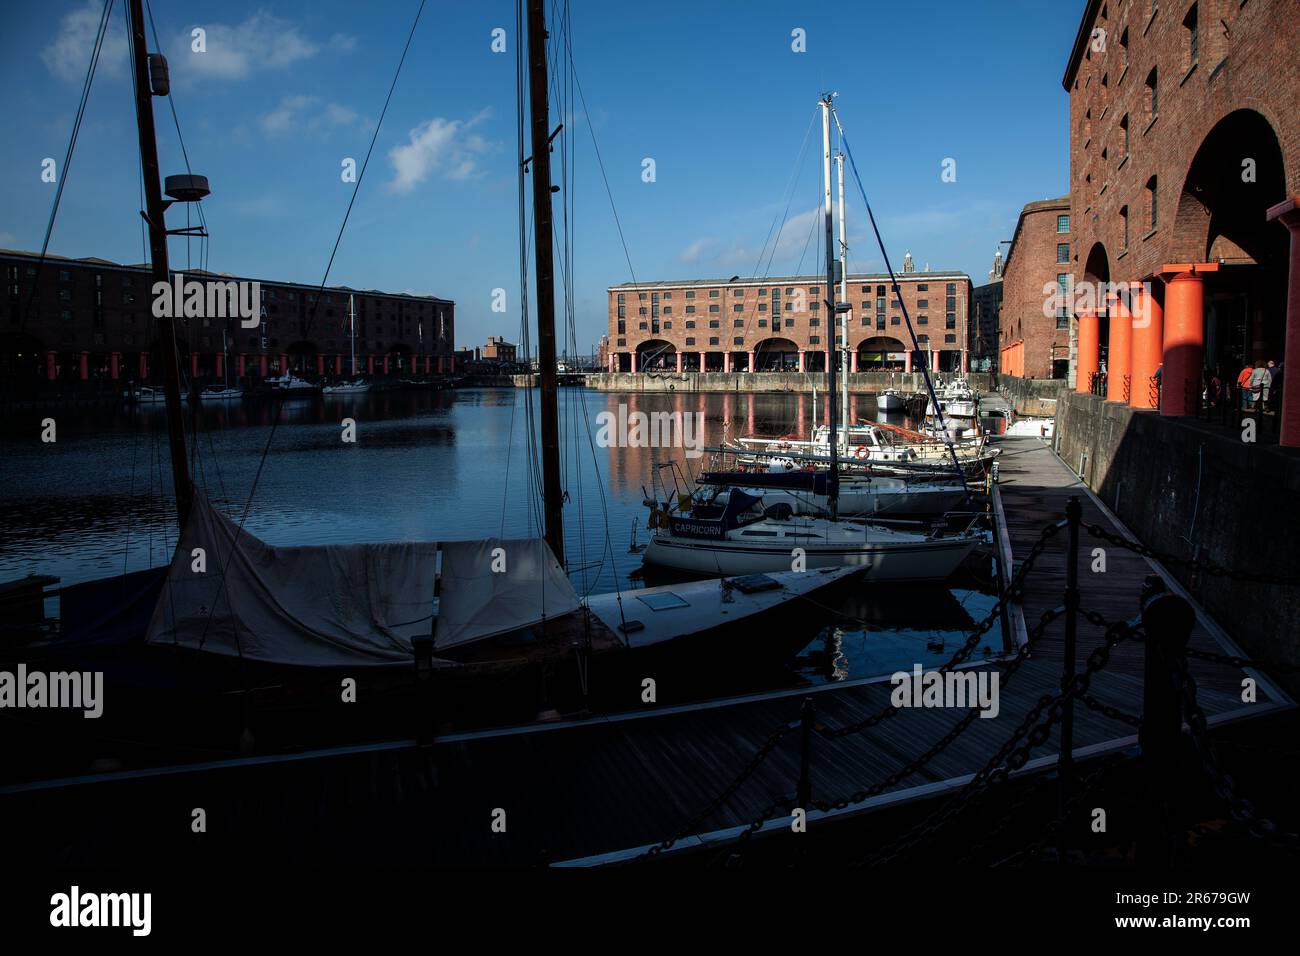 A view of The Royal Albert Dock a complex of dock buildings and warehouses in Liverpool, England with yachts moored at the quay Stock Photo